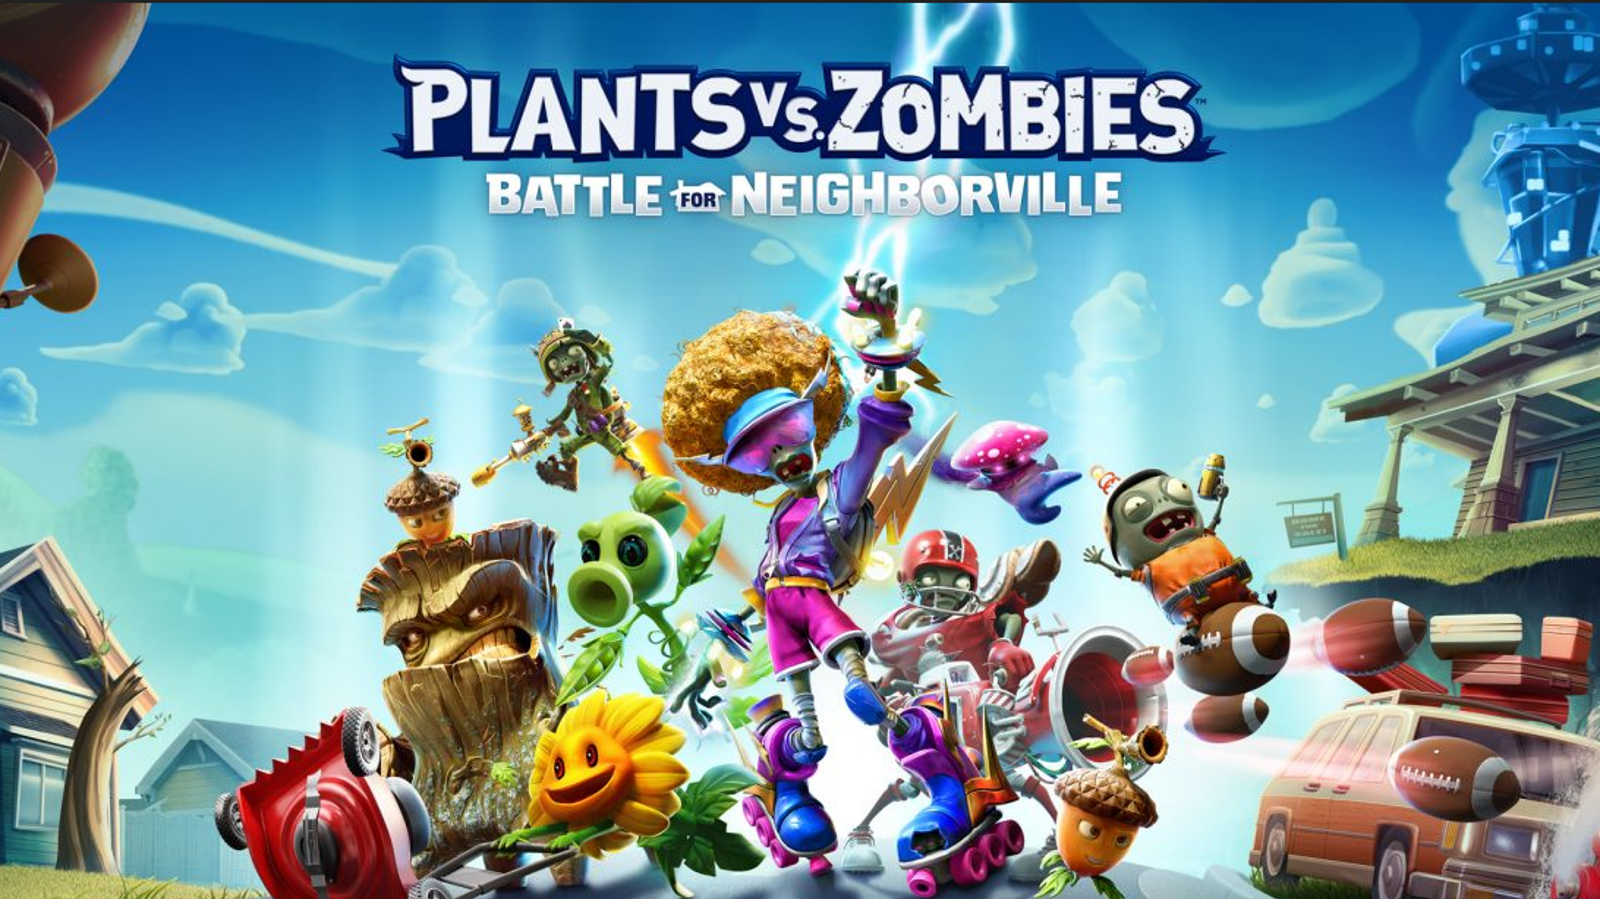 Plants vs Zombies Battle for Neighborville was the No1 game